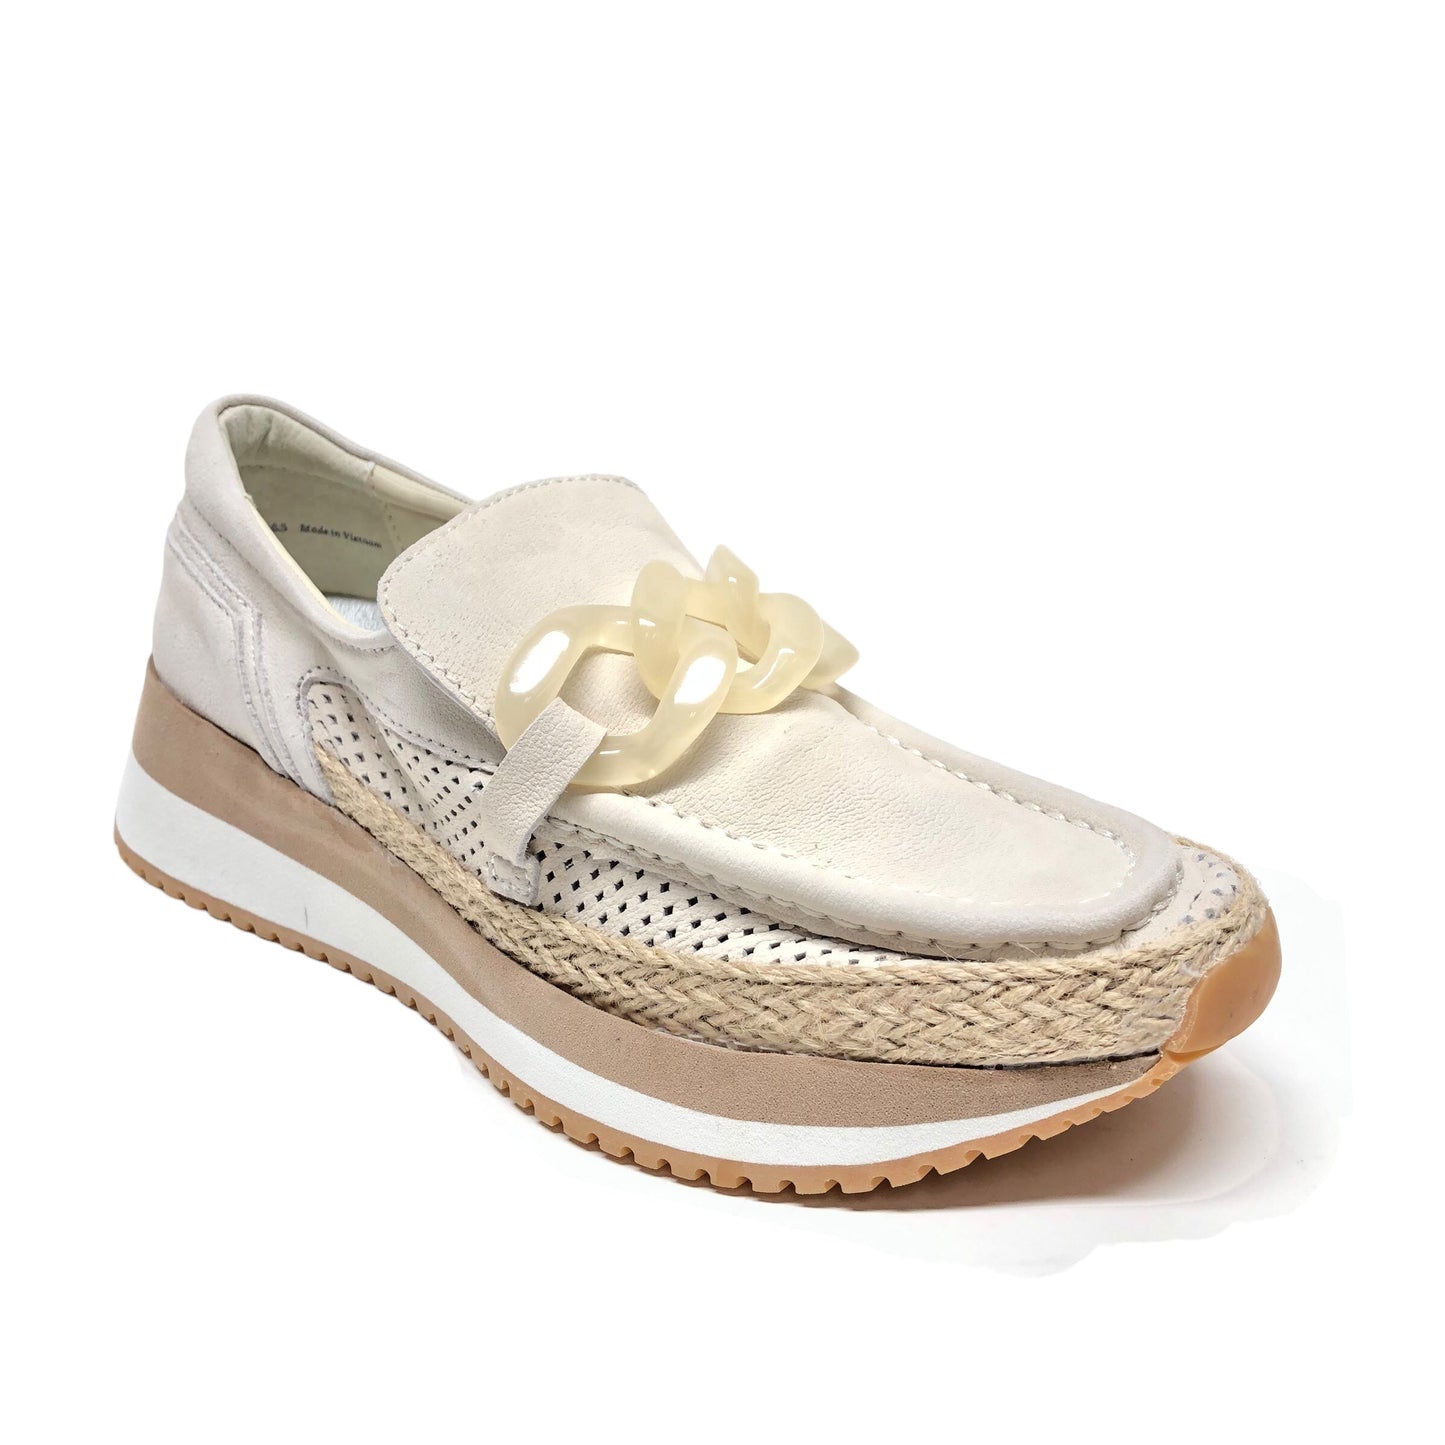 Cream Shoes Sneakers Dolce Vita, Size 6.5